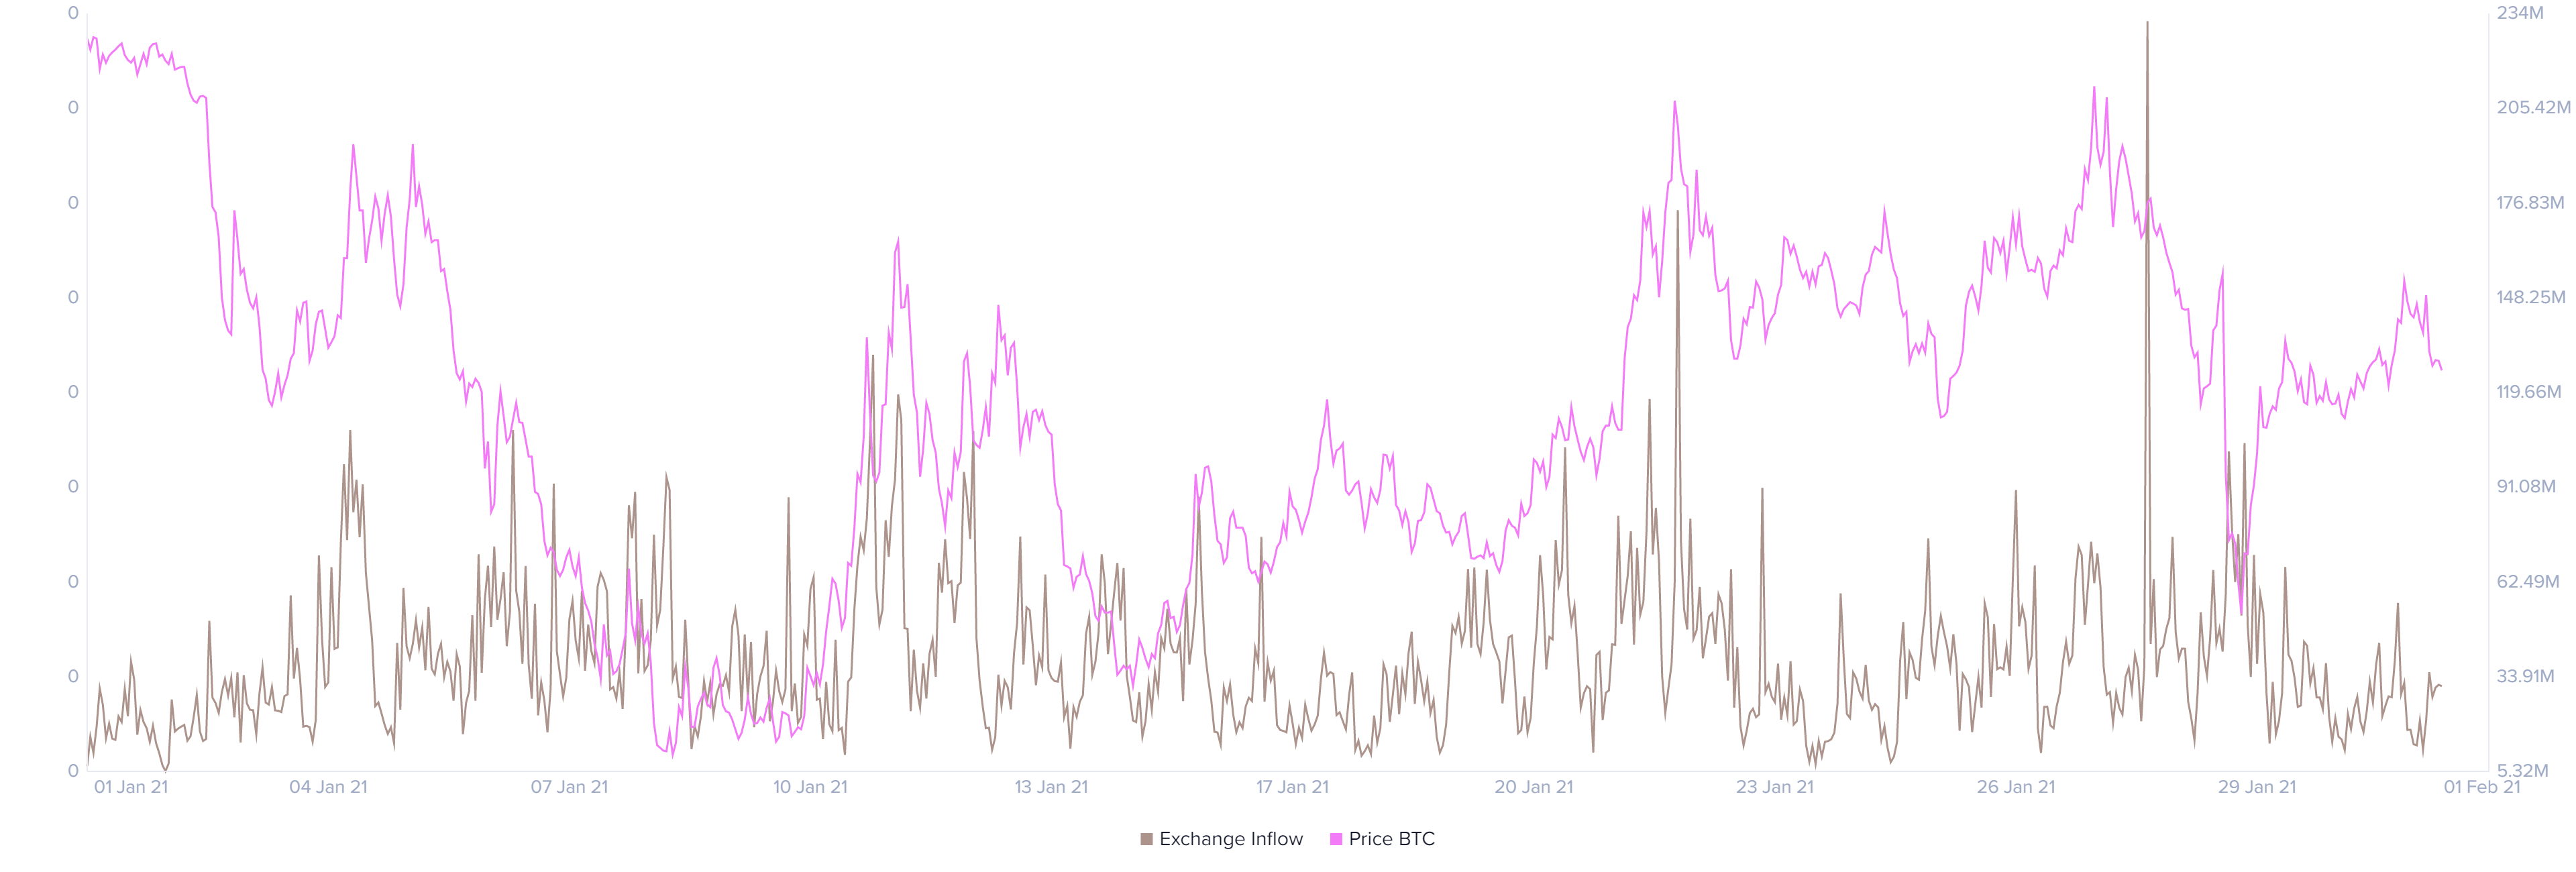 USDT exchange inflow plotted against Bitcoin price (green)